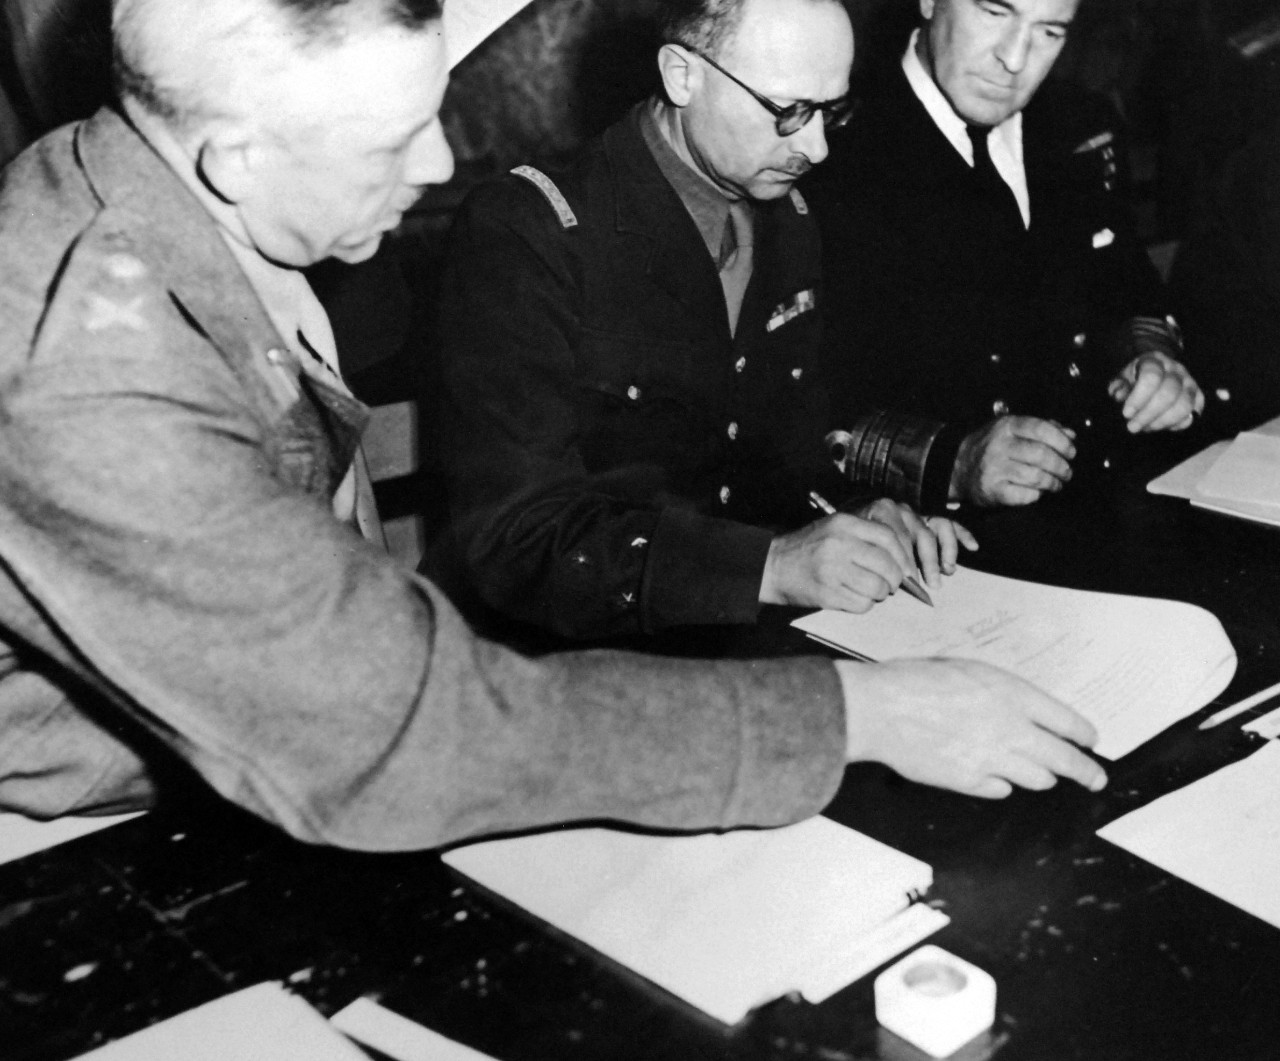 111-SC-27464:   Surrender of Germany, May 7, 1945.  General Francois Sevez, Representative of General Alphonse Juin, Chief of Staff to General de Gaulle, is here shown affixing his signature to the document under which all remaining German resistance capitulated, on his right is Lieutenant General Sir F.E. Morgan, Deputy Chief of Staff, and on his left is Admiral Harold M. Burrough, Commander in Chief, Allied Naval Expeditionary Forces.  U.S. Army photograph.  